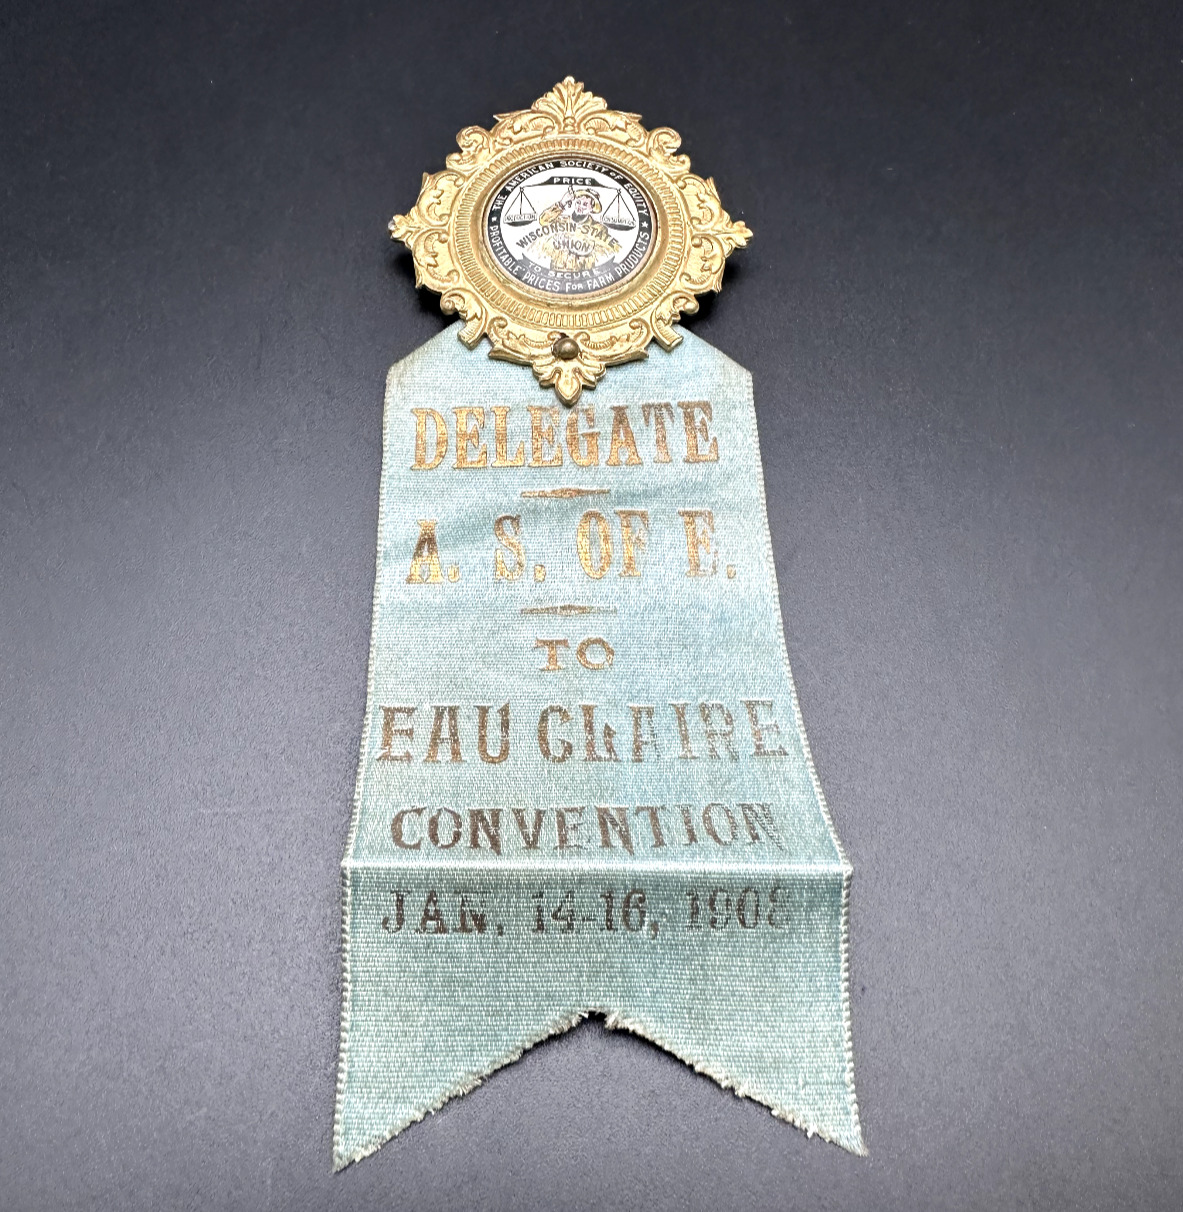 RARE 1908 AMERICAN SOCIETY OF EQUITY WISCONSIN FARM UNION CONVENTION BADGE L48